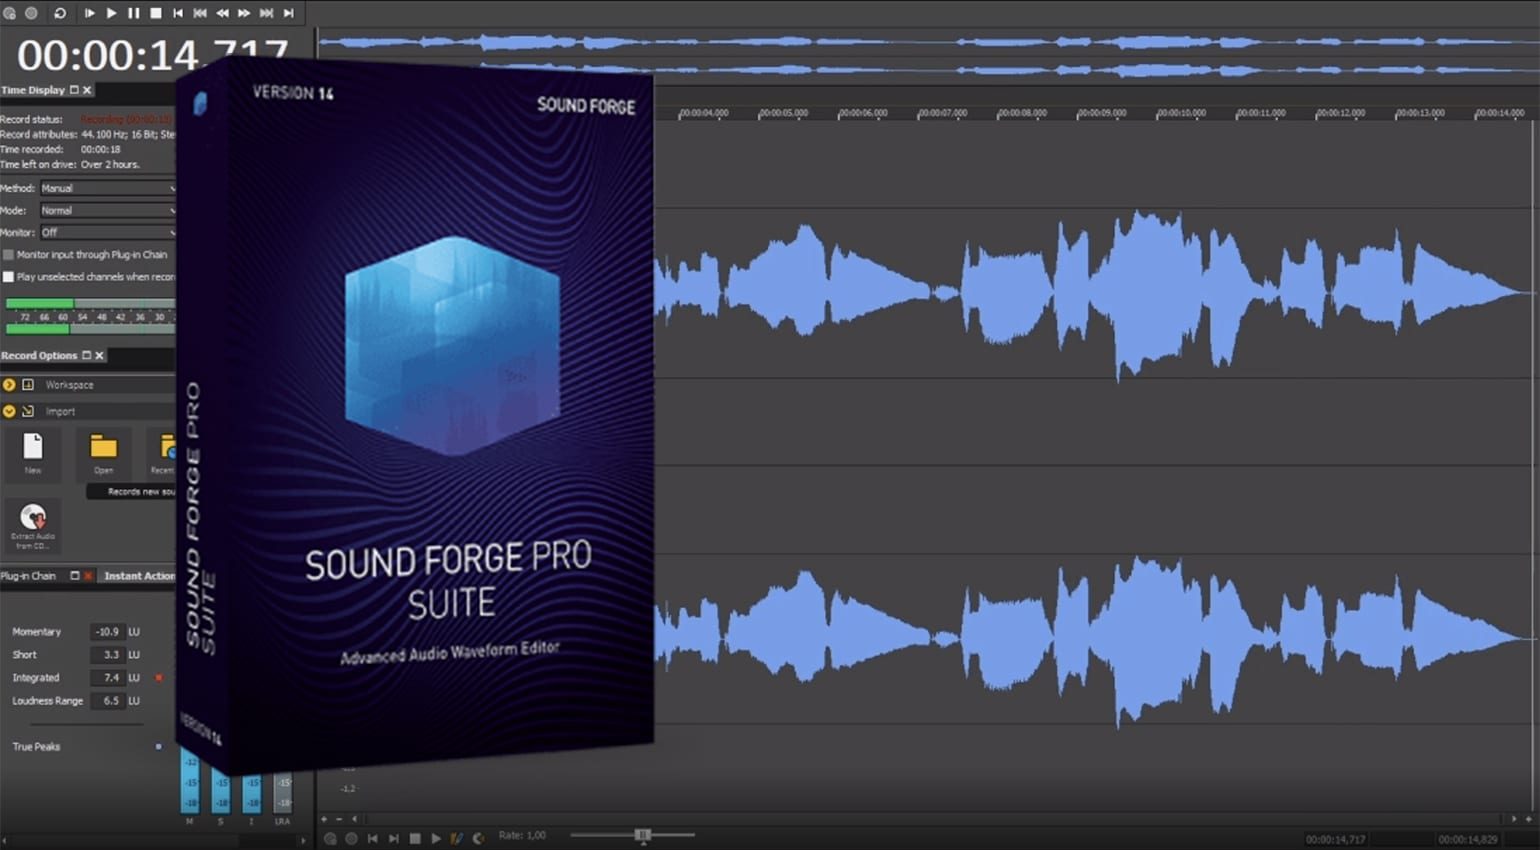 MAGIX SOUND FORGE Pro Suite 17.0.2.109 for mac download free